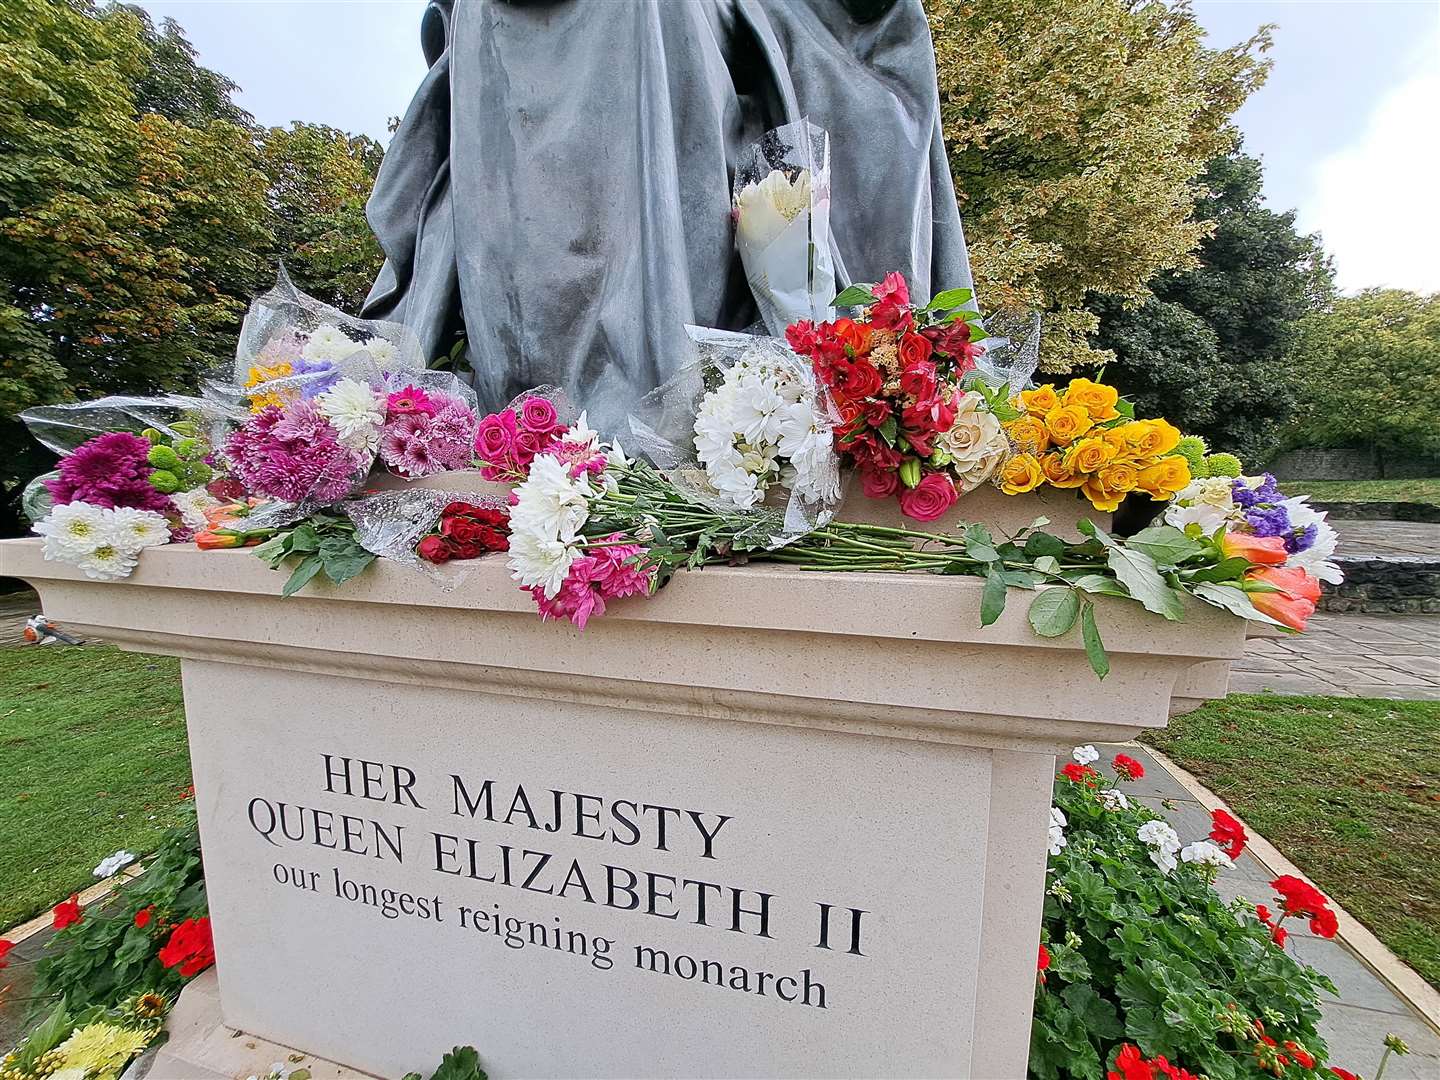 Residents have placed flowers on the Queen Elizabeth II statue in St Andrew's Gardens, Gravesend